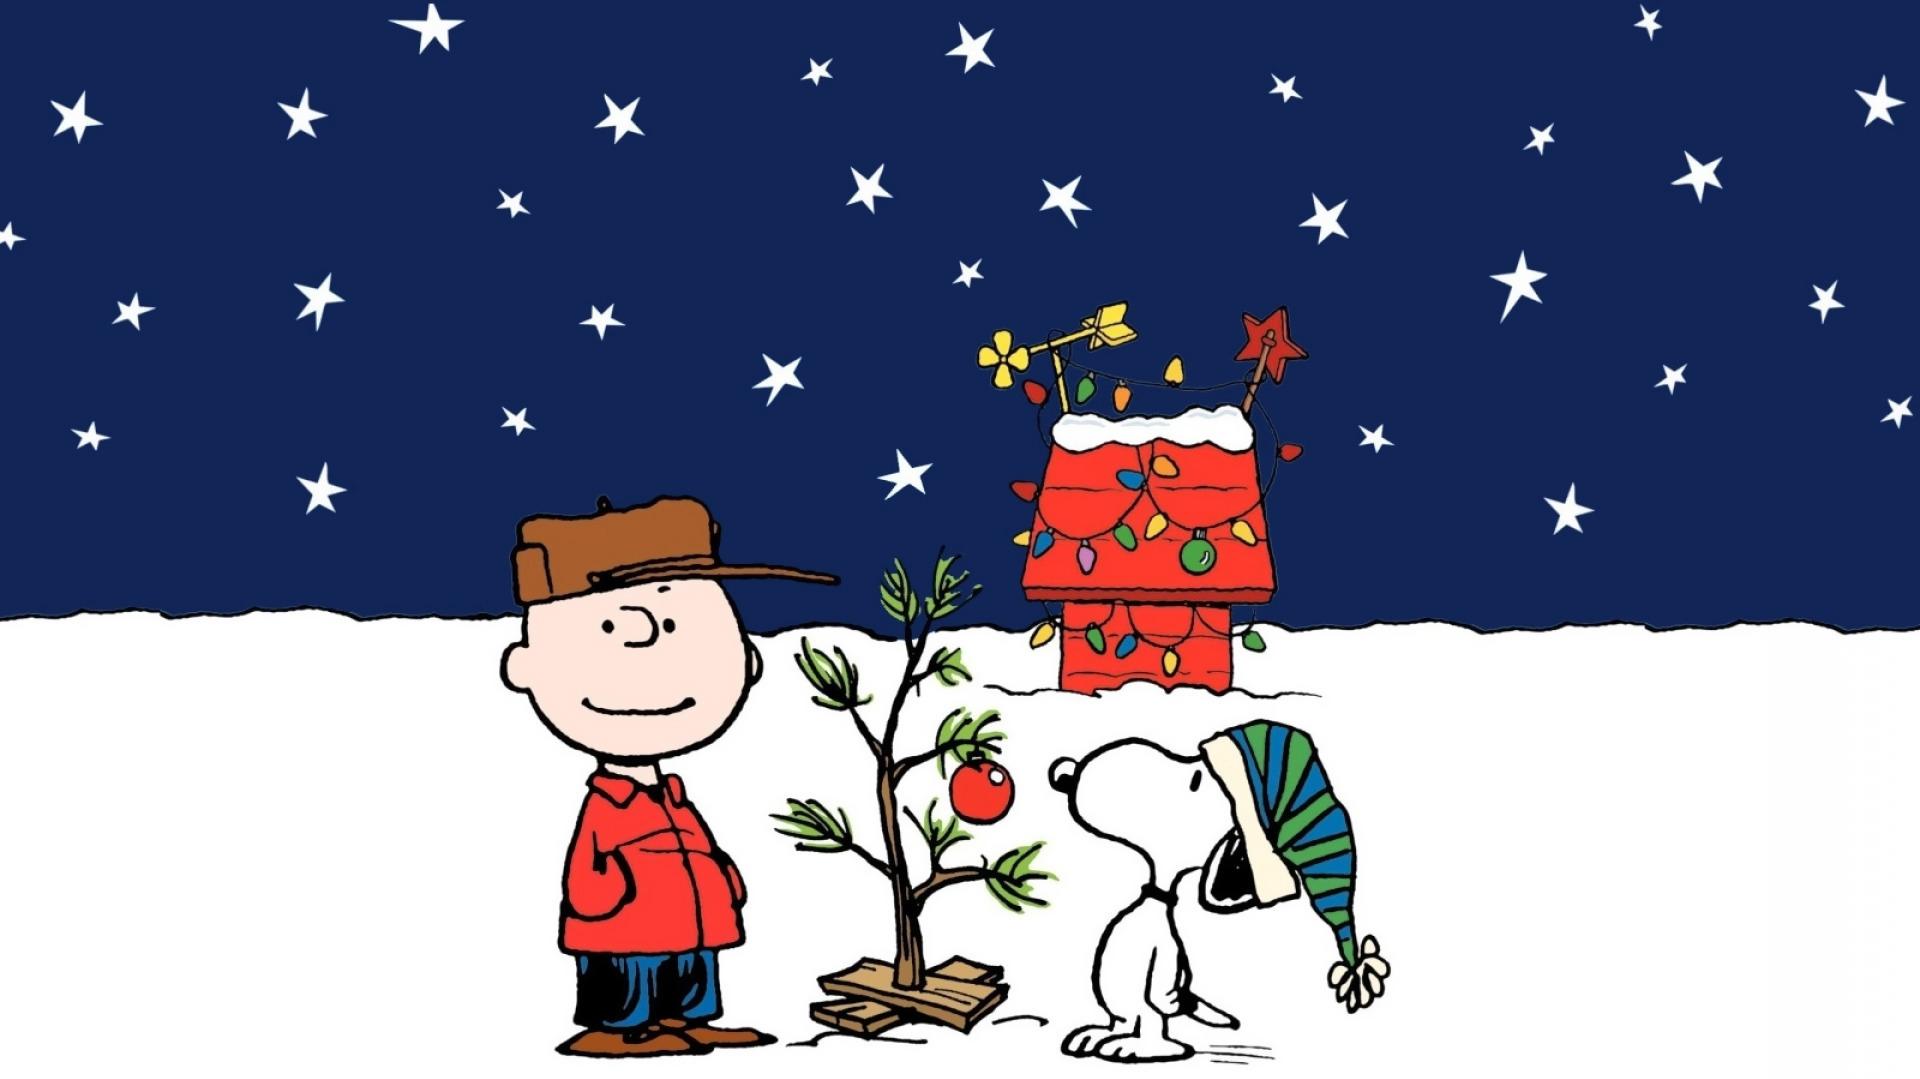 A Charlie Brown Christmas Wallpaper For Mobile Phone